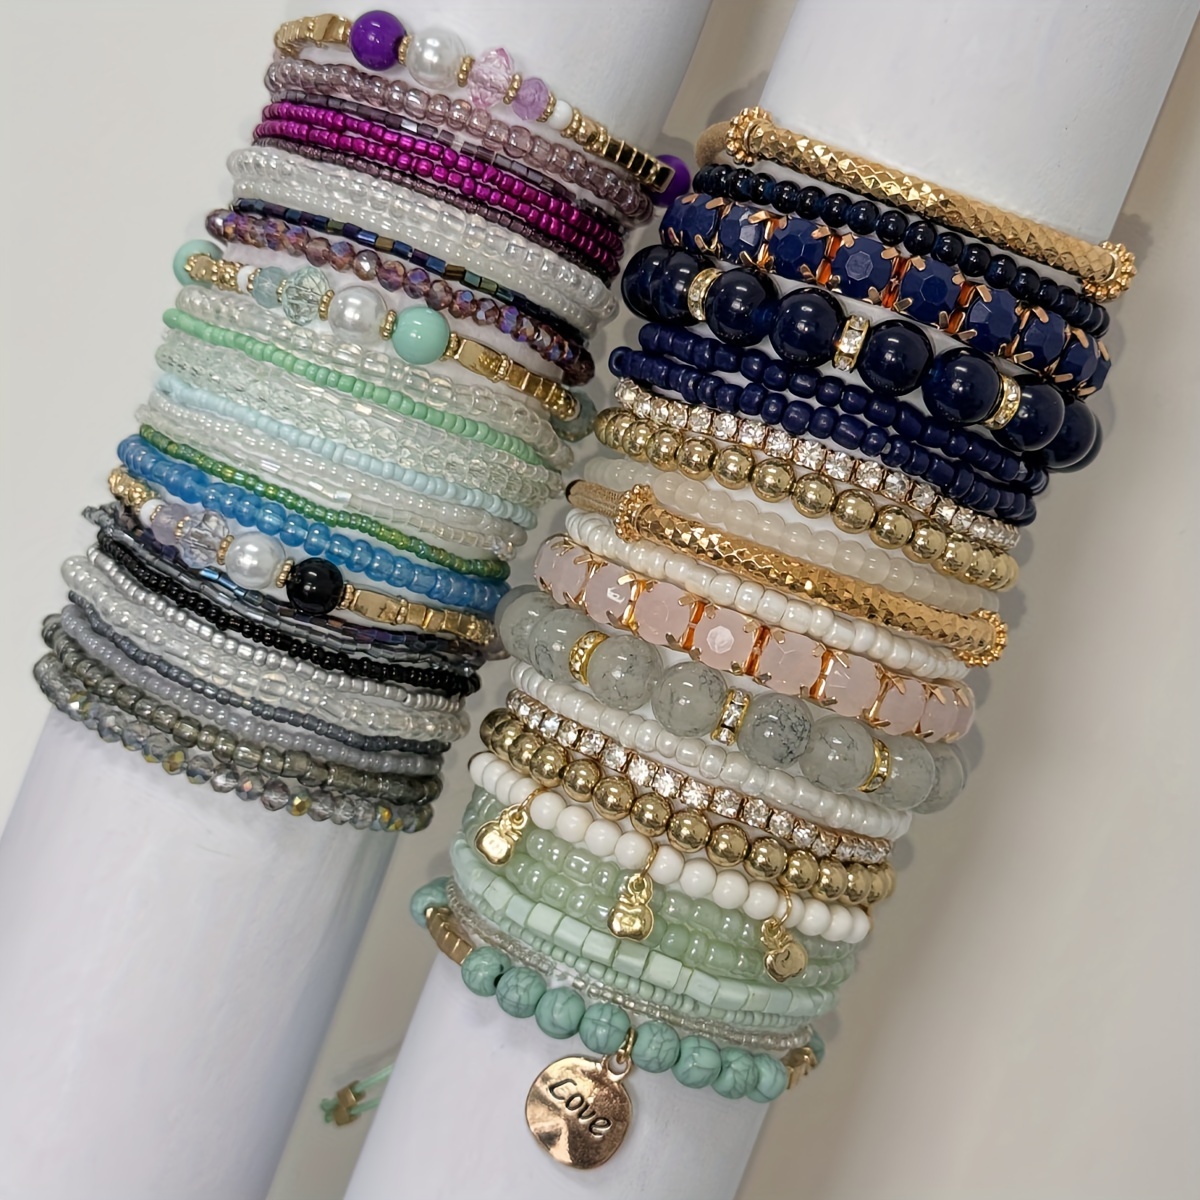 

Bohemian Style Beaded Bracelet Set For Women, 53-piece Stackable Handcrafted Tassel Bracelets, Elegant Elastic Stretch Beaded Bangle Set, Mixed Colors And Textures